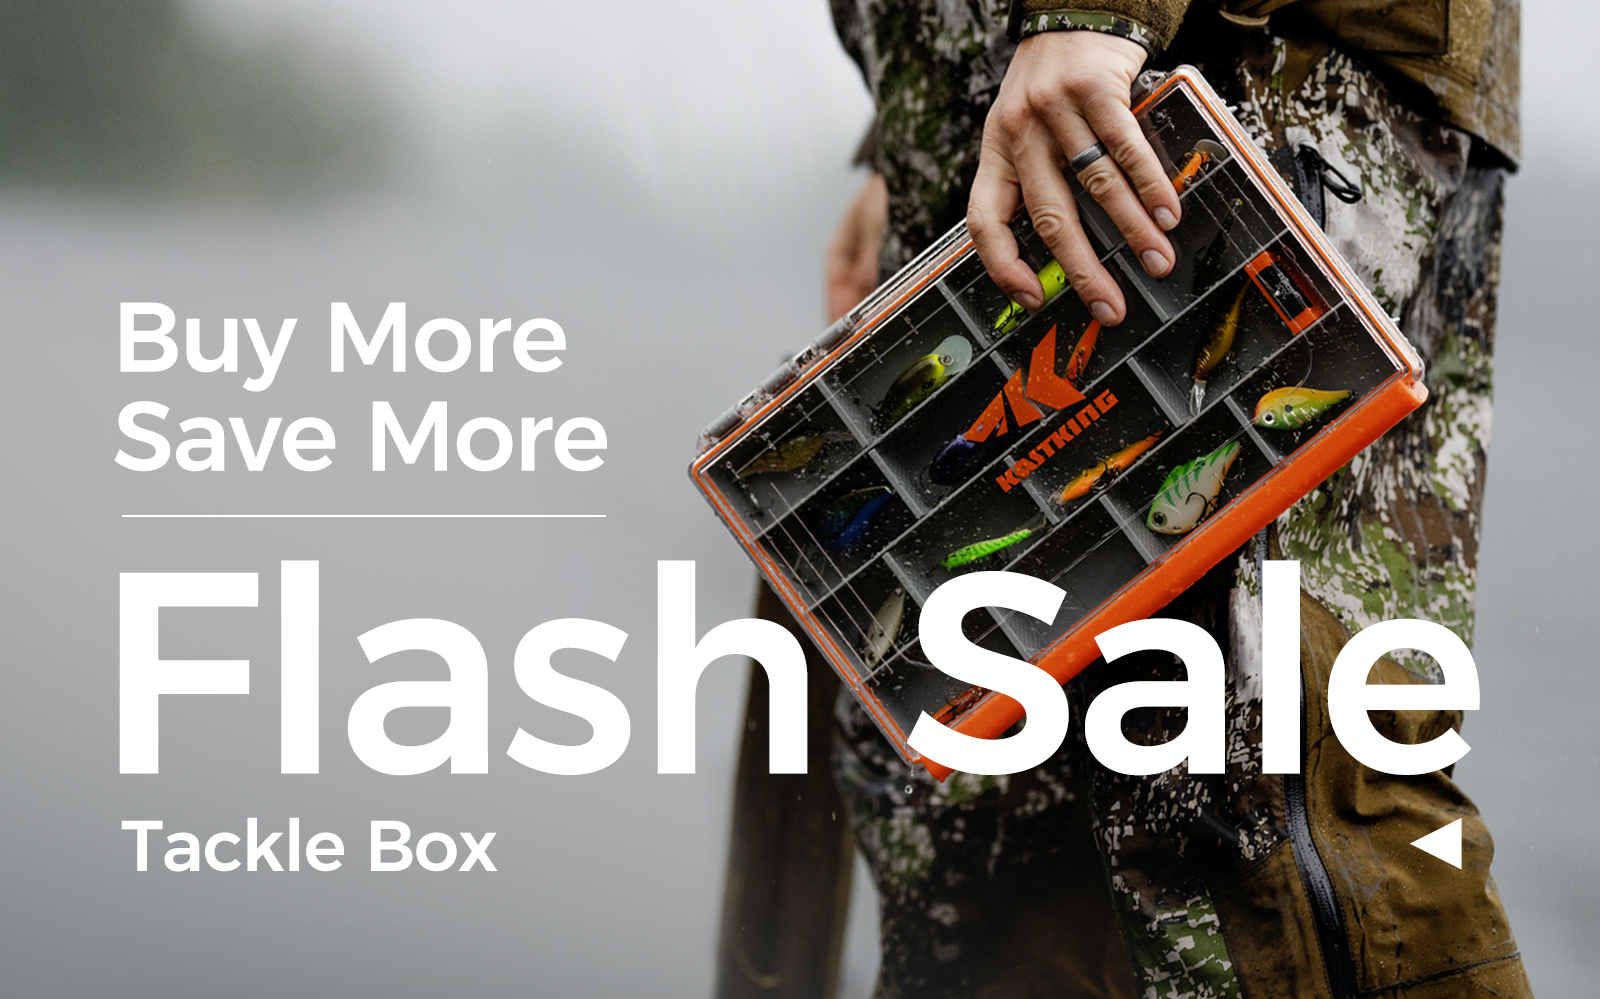 Catch the Best Deals: Buy More Save More on Tackle Boxes Now! - KastKing